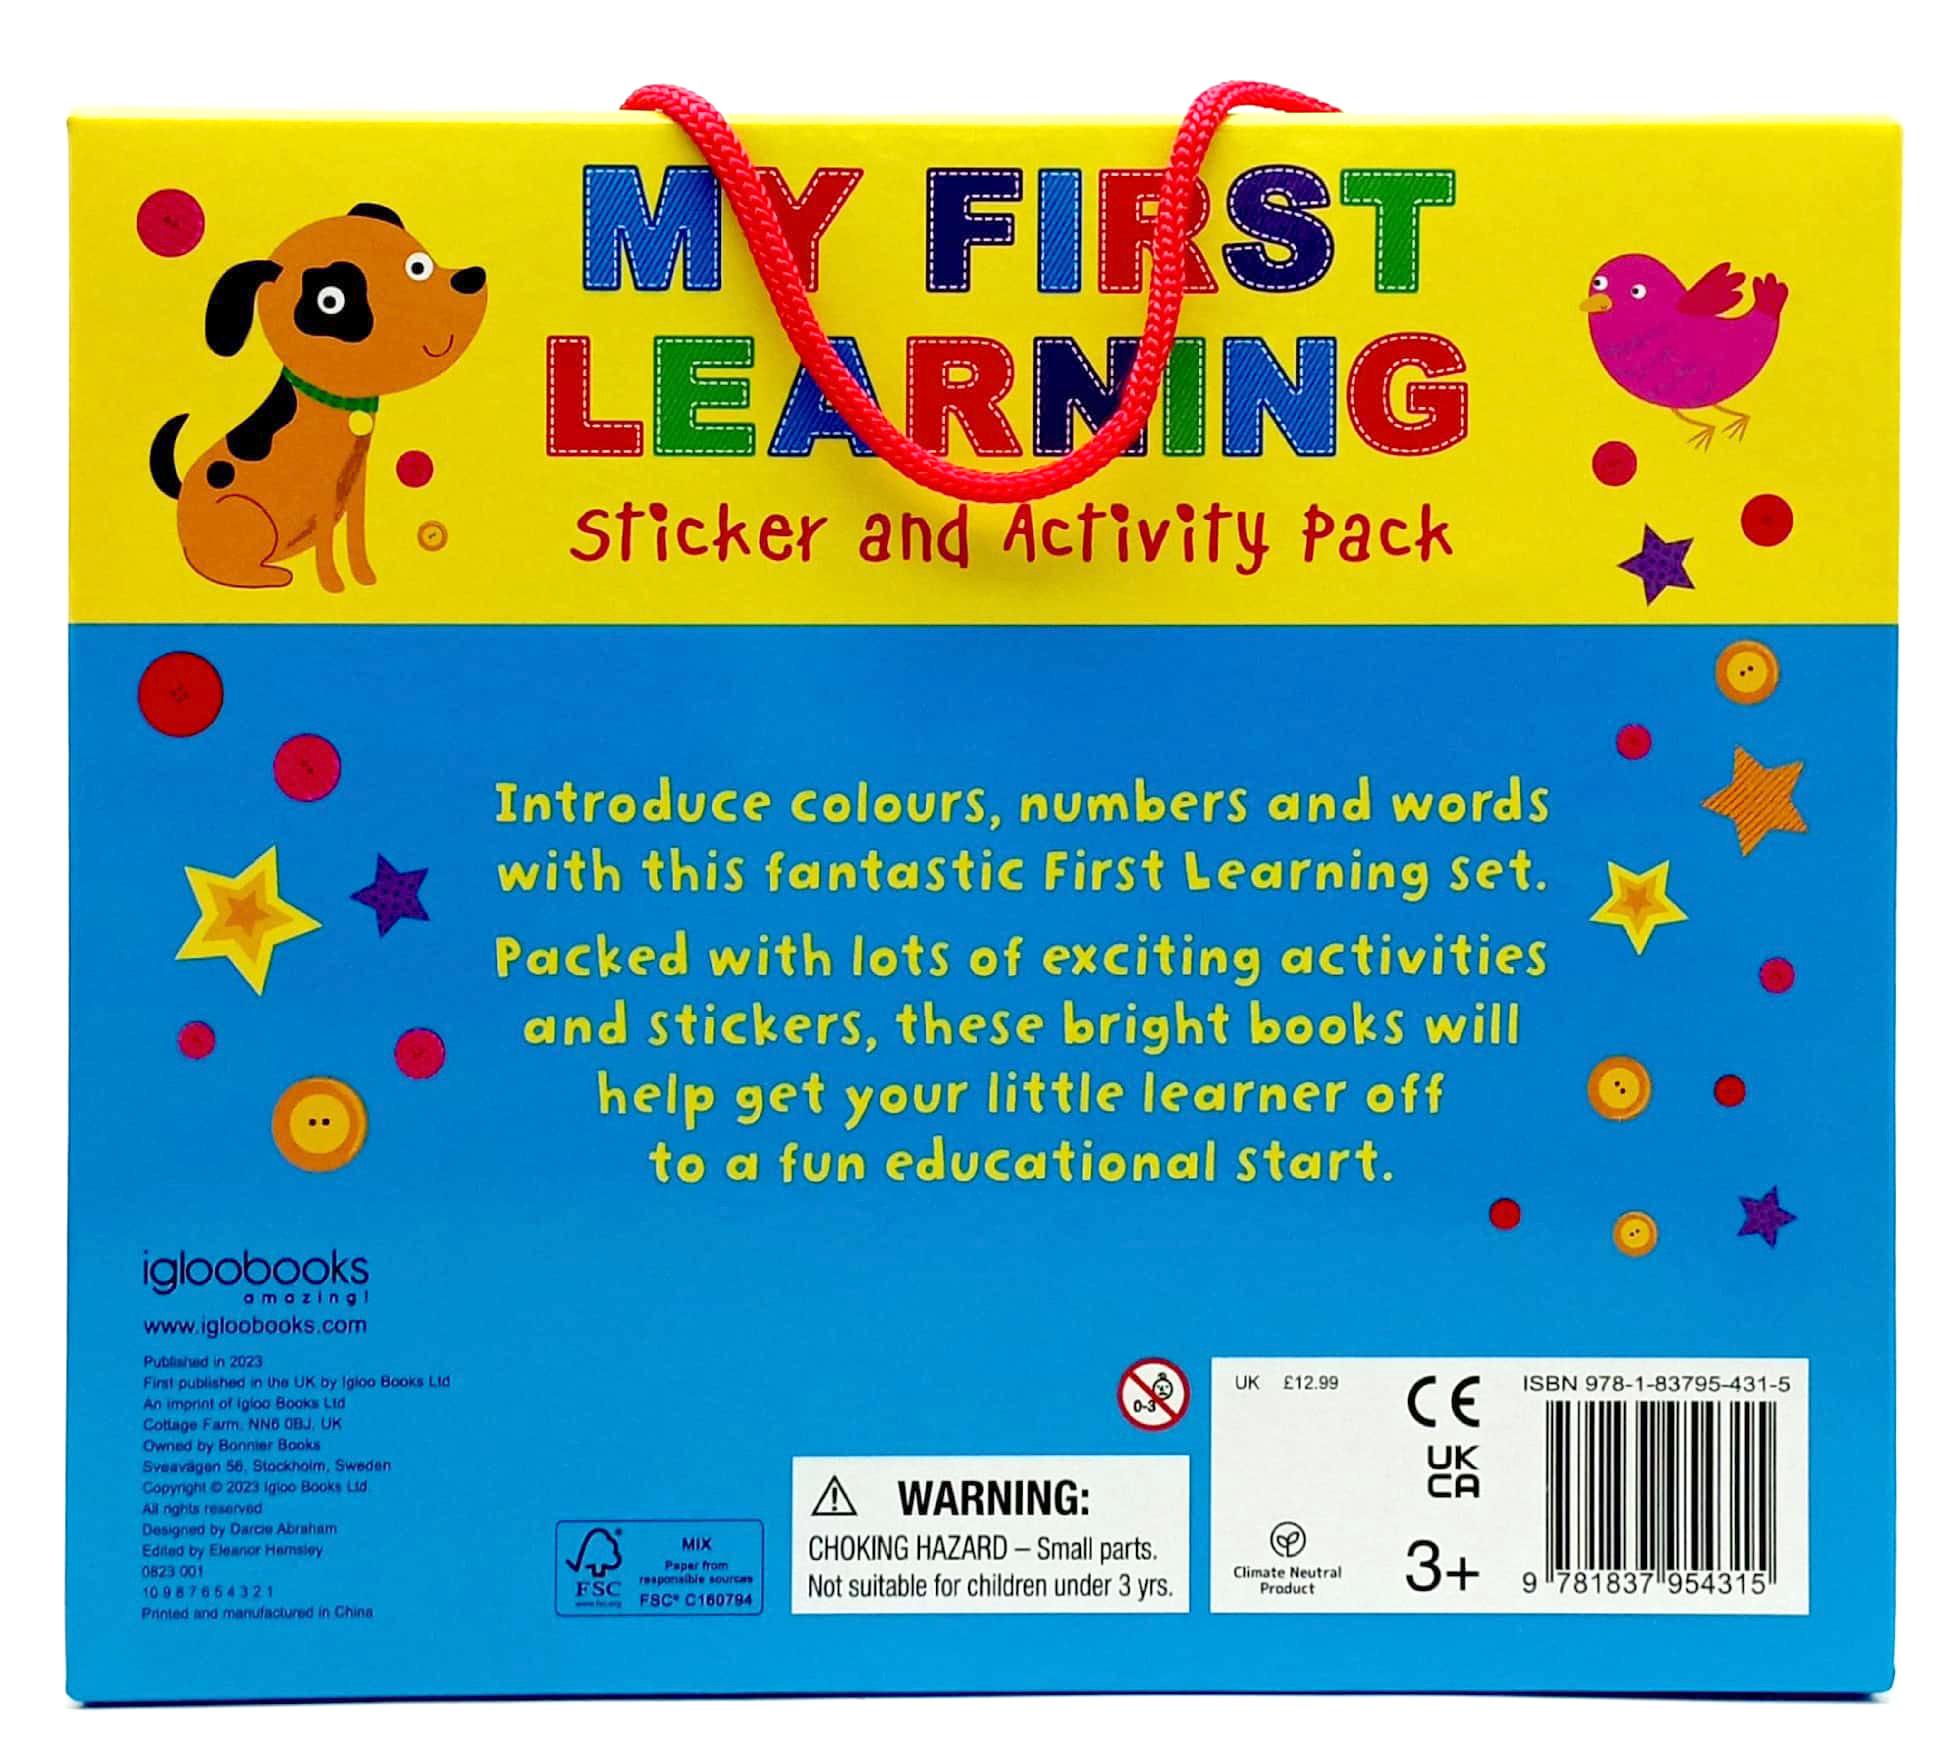 My First Learning Sticker and Activity Pack